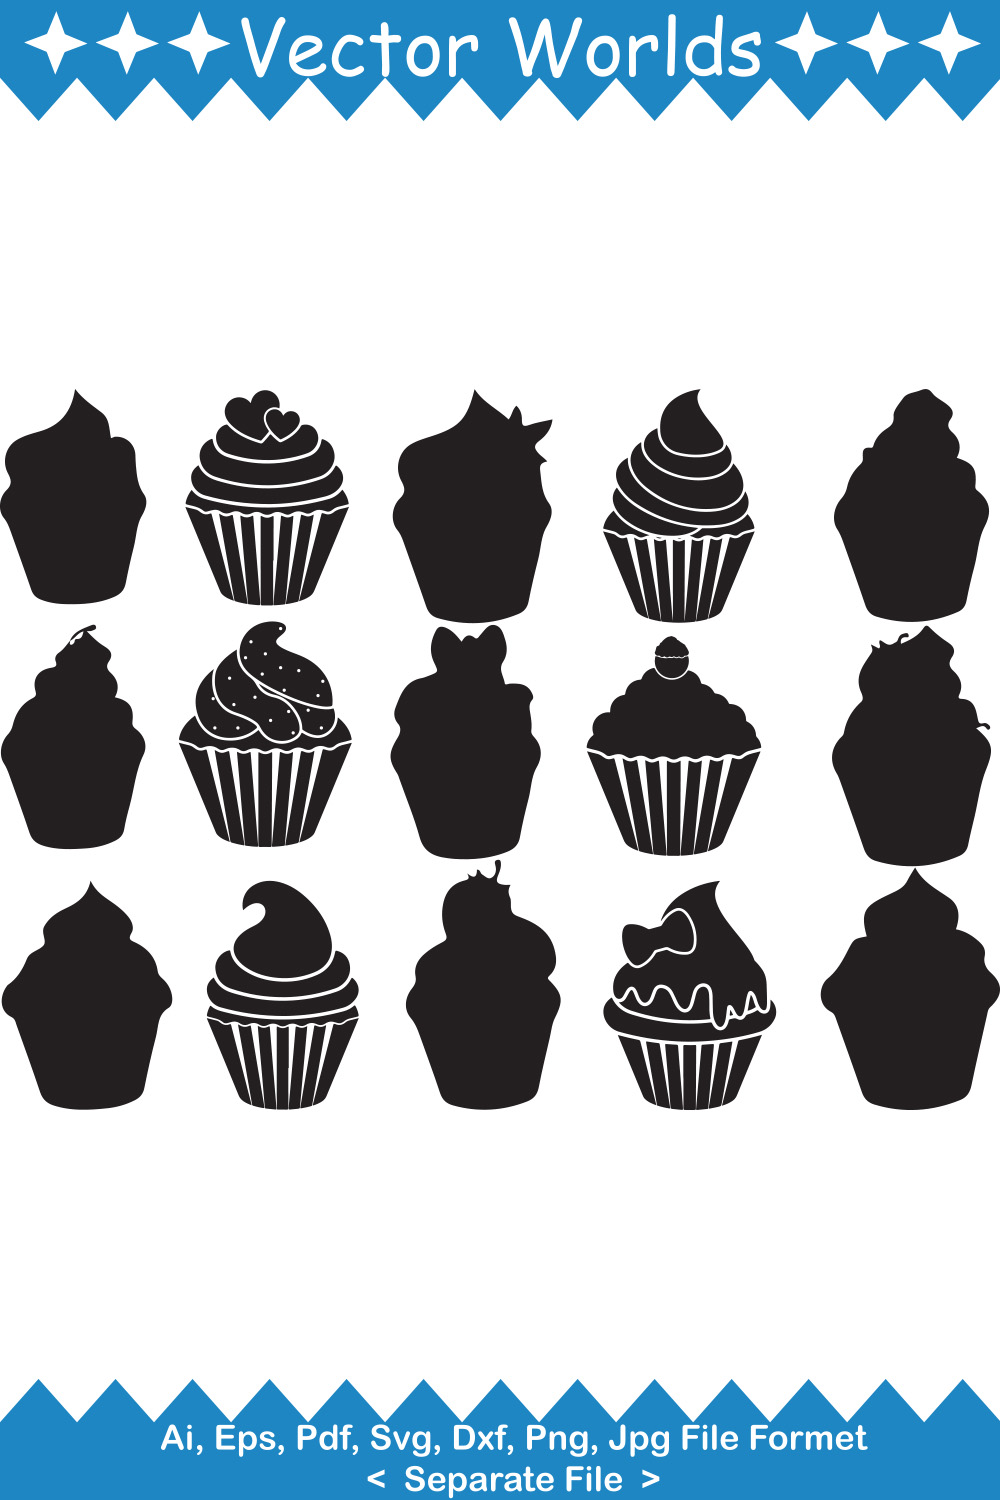 Set of unique images of cupcakes silhouettes